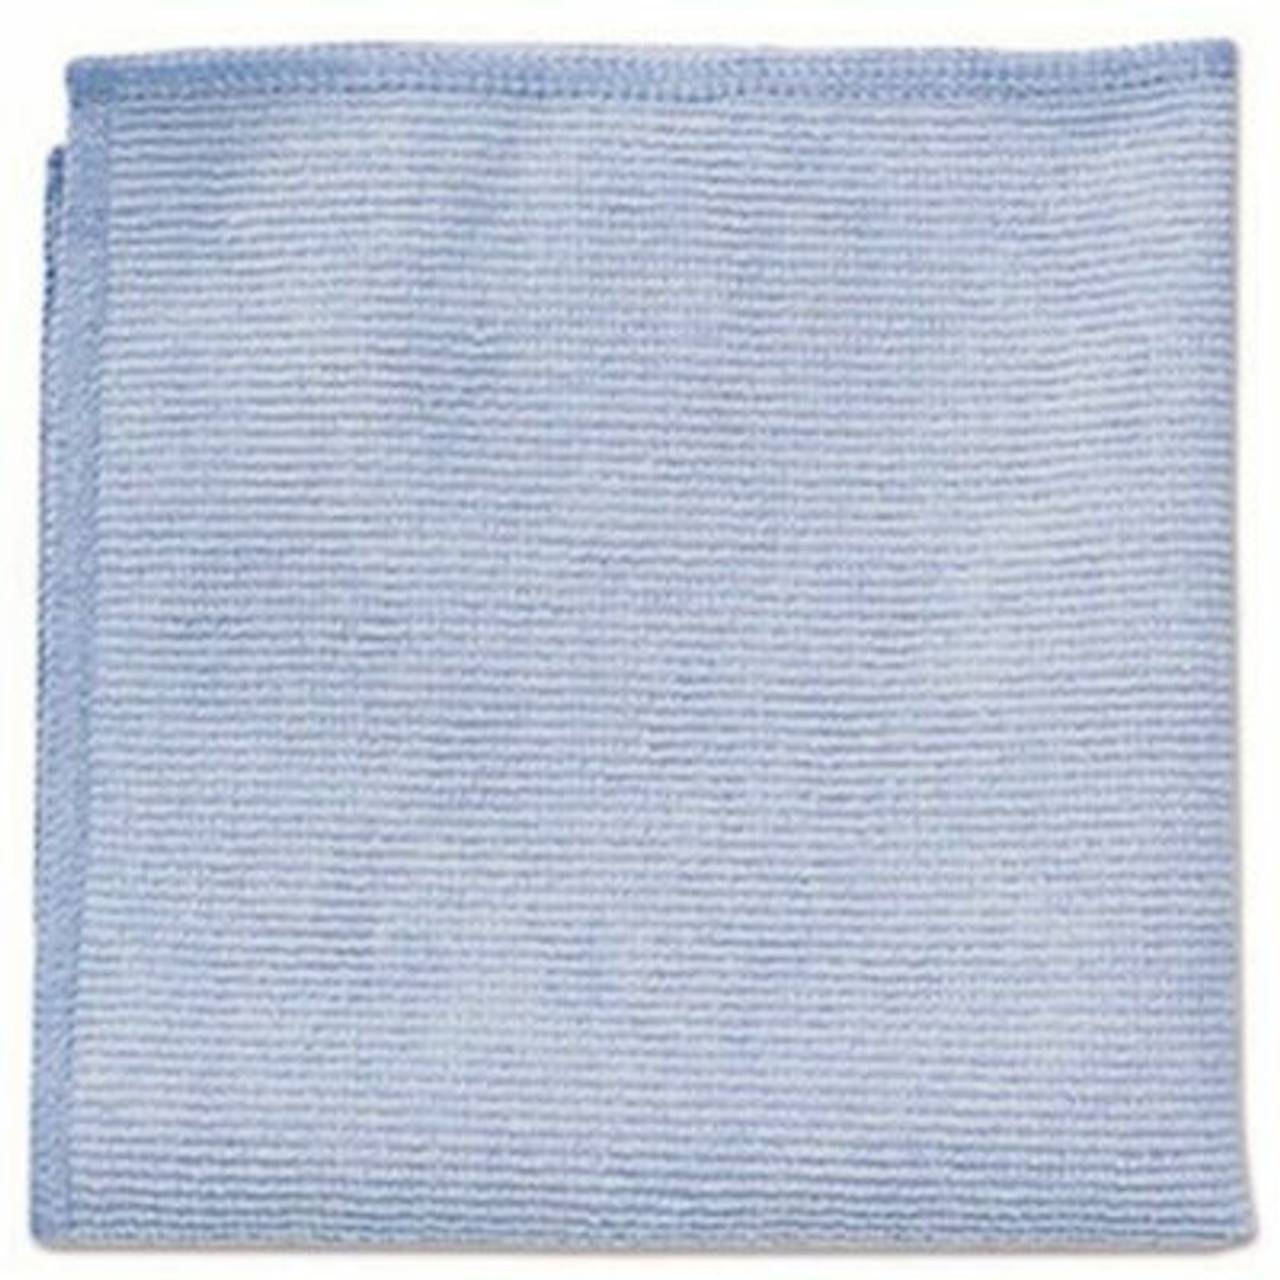 Rubbermaid Commercial Products 16 In. X 16 In. Blue Light Commercial Microfiber - 293353